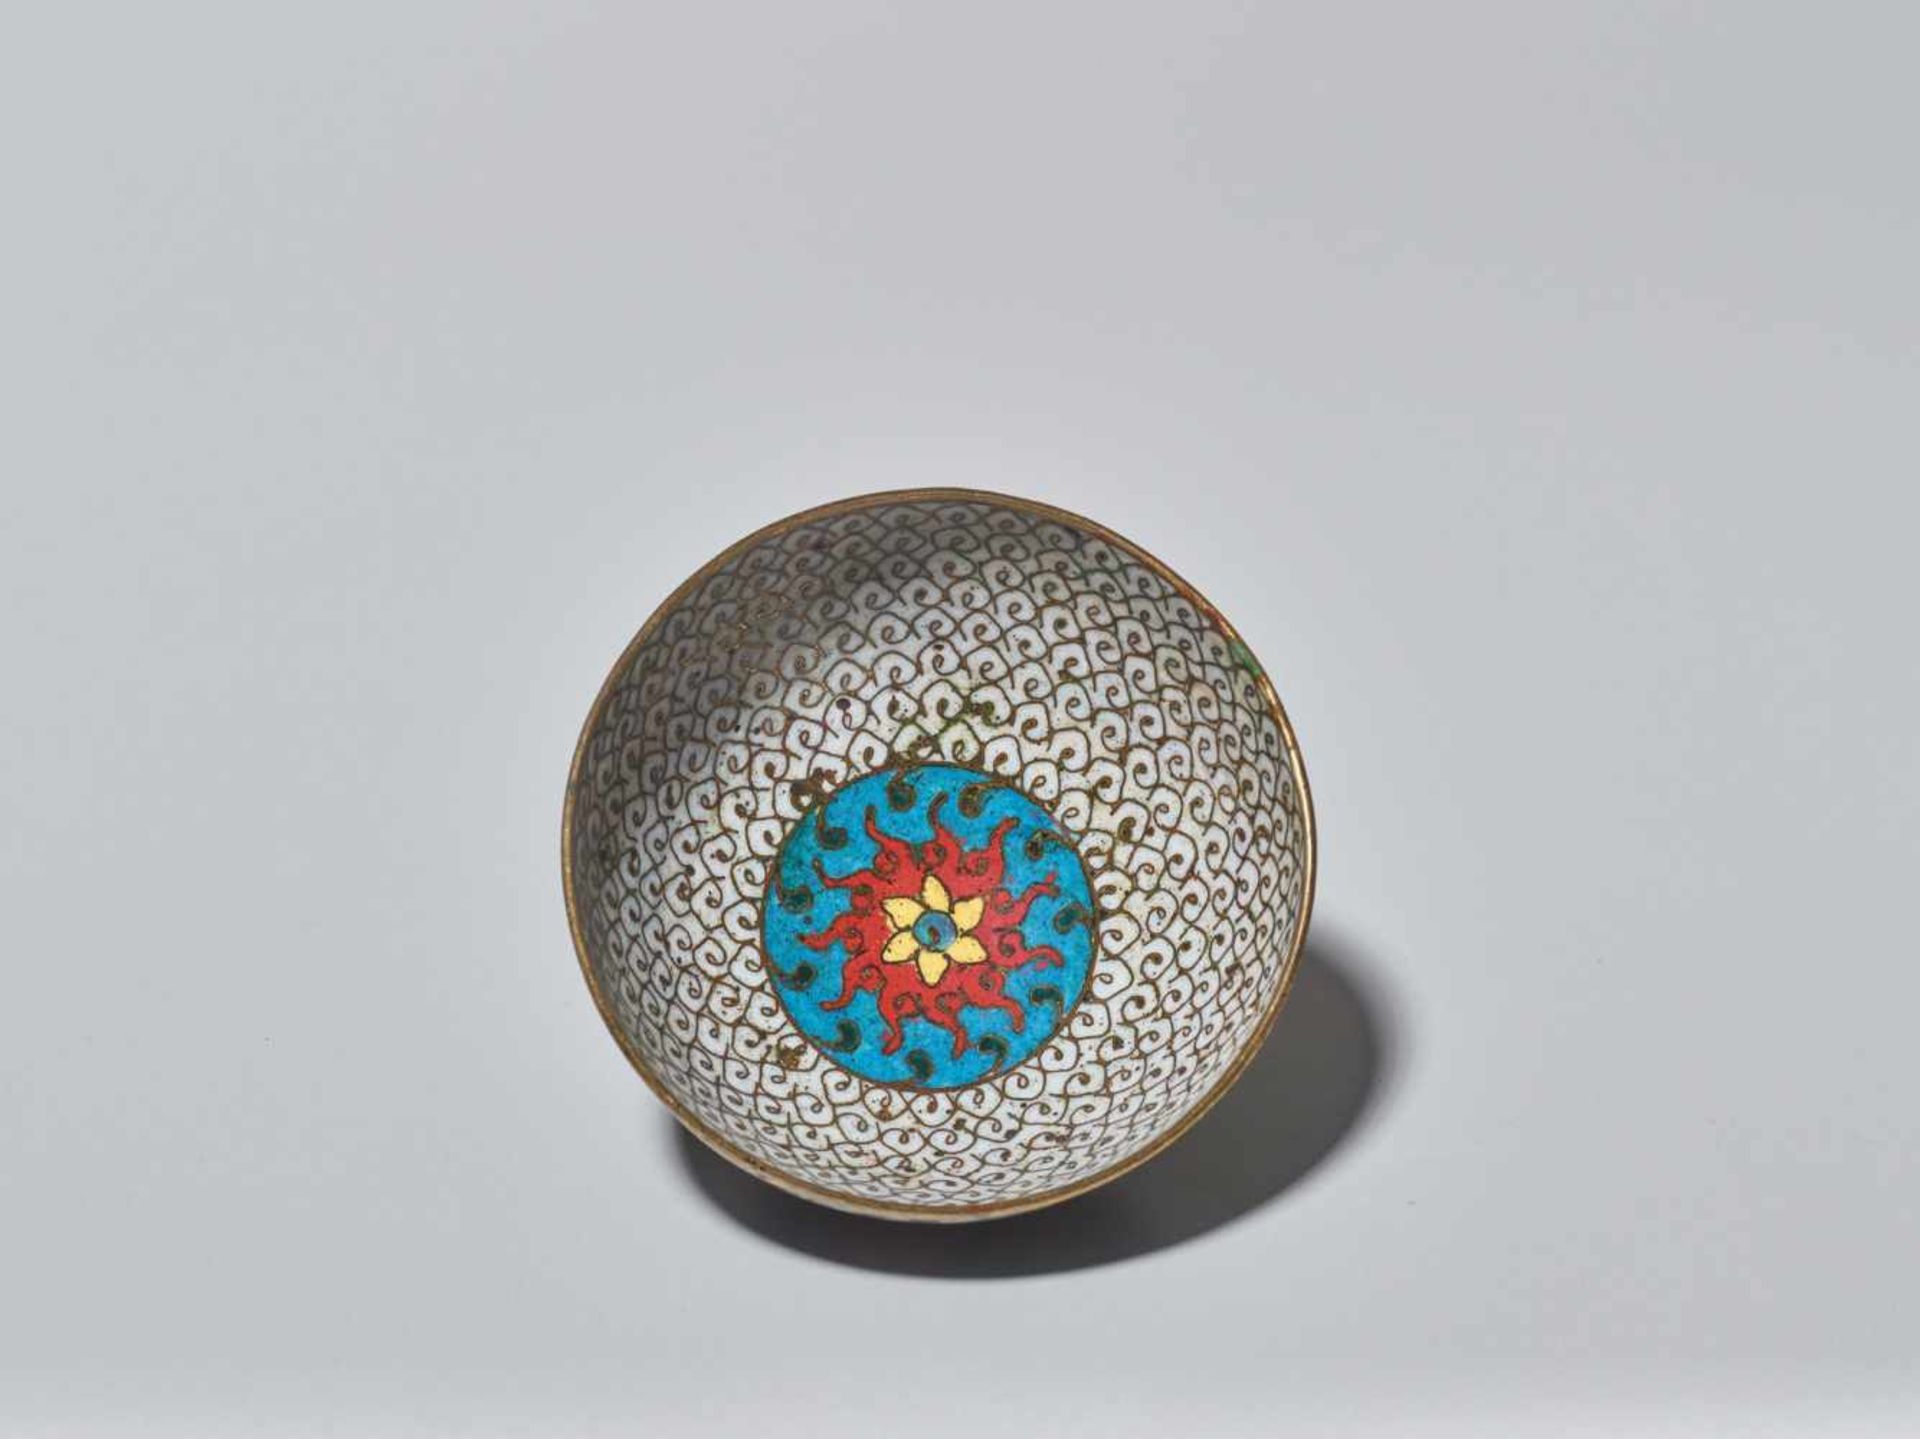 A CLOISONNE ENAMEL ‘LOTUS’ BOWL, MING DYNASTY, 16TH CENTURY The bronze bowl with gilt rims and - Image 3 of 7